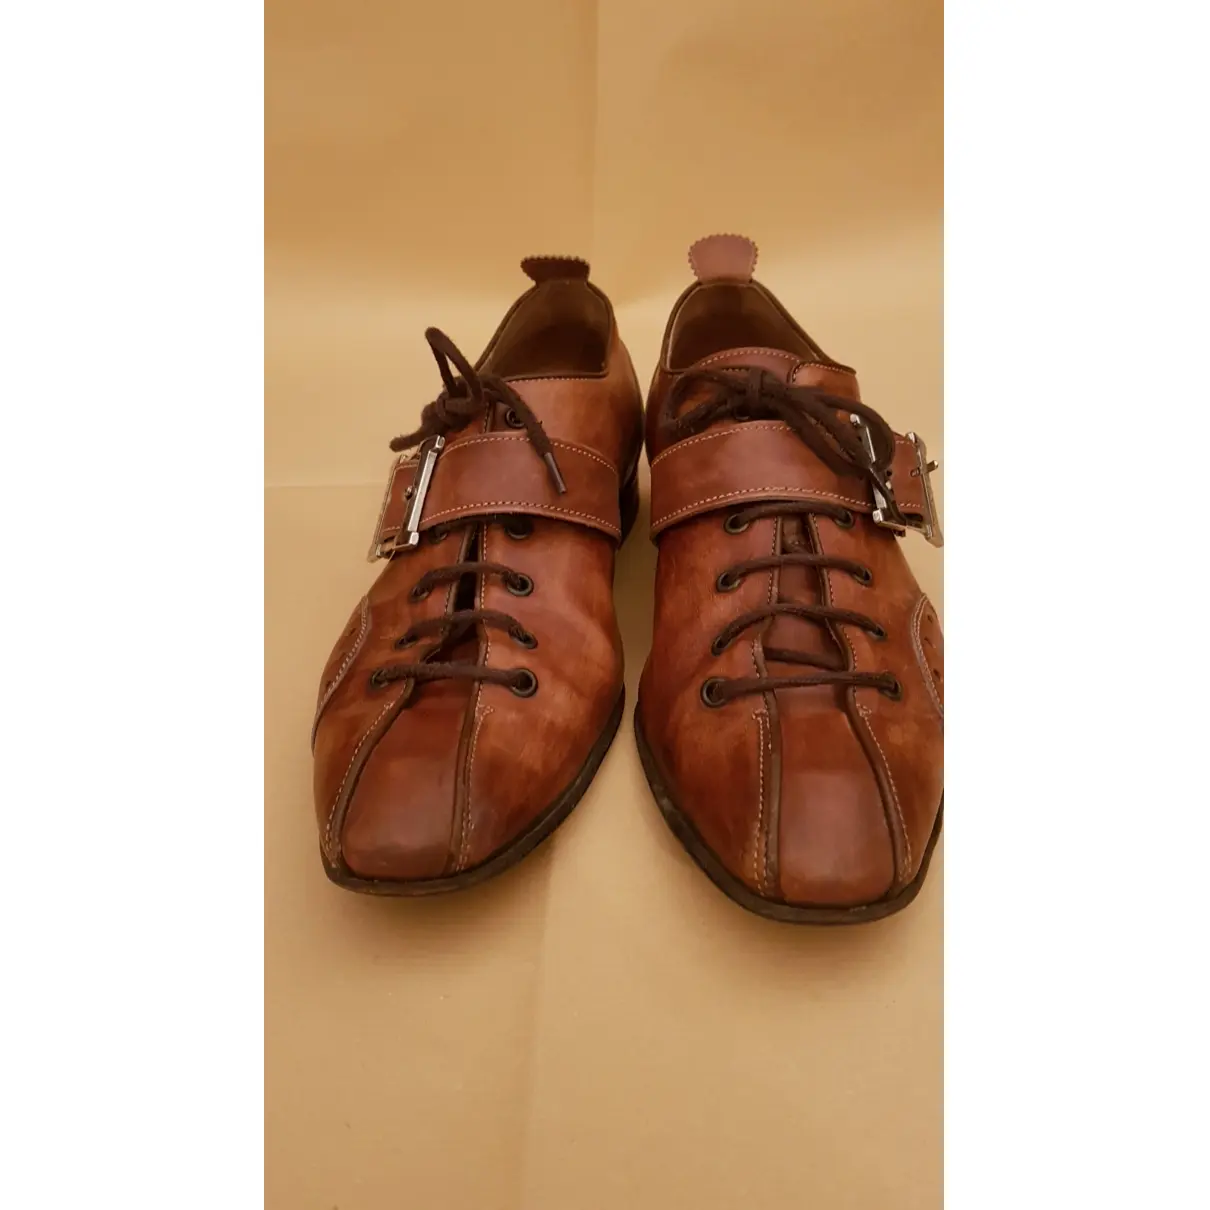 Buy Harris Leather lace ups online